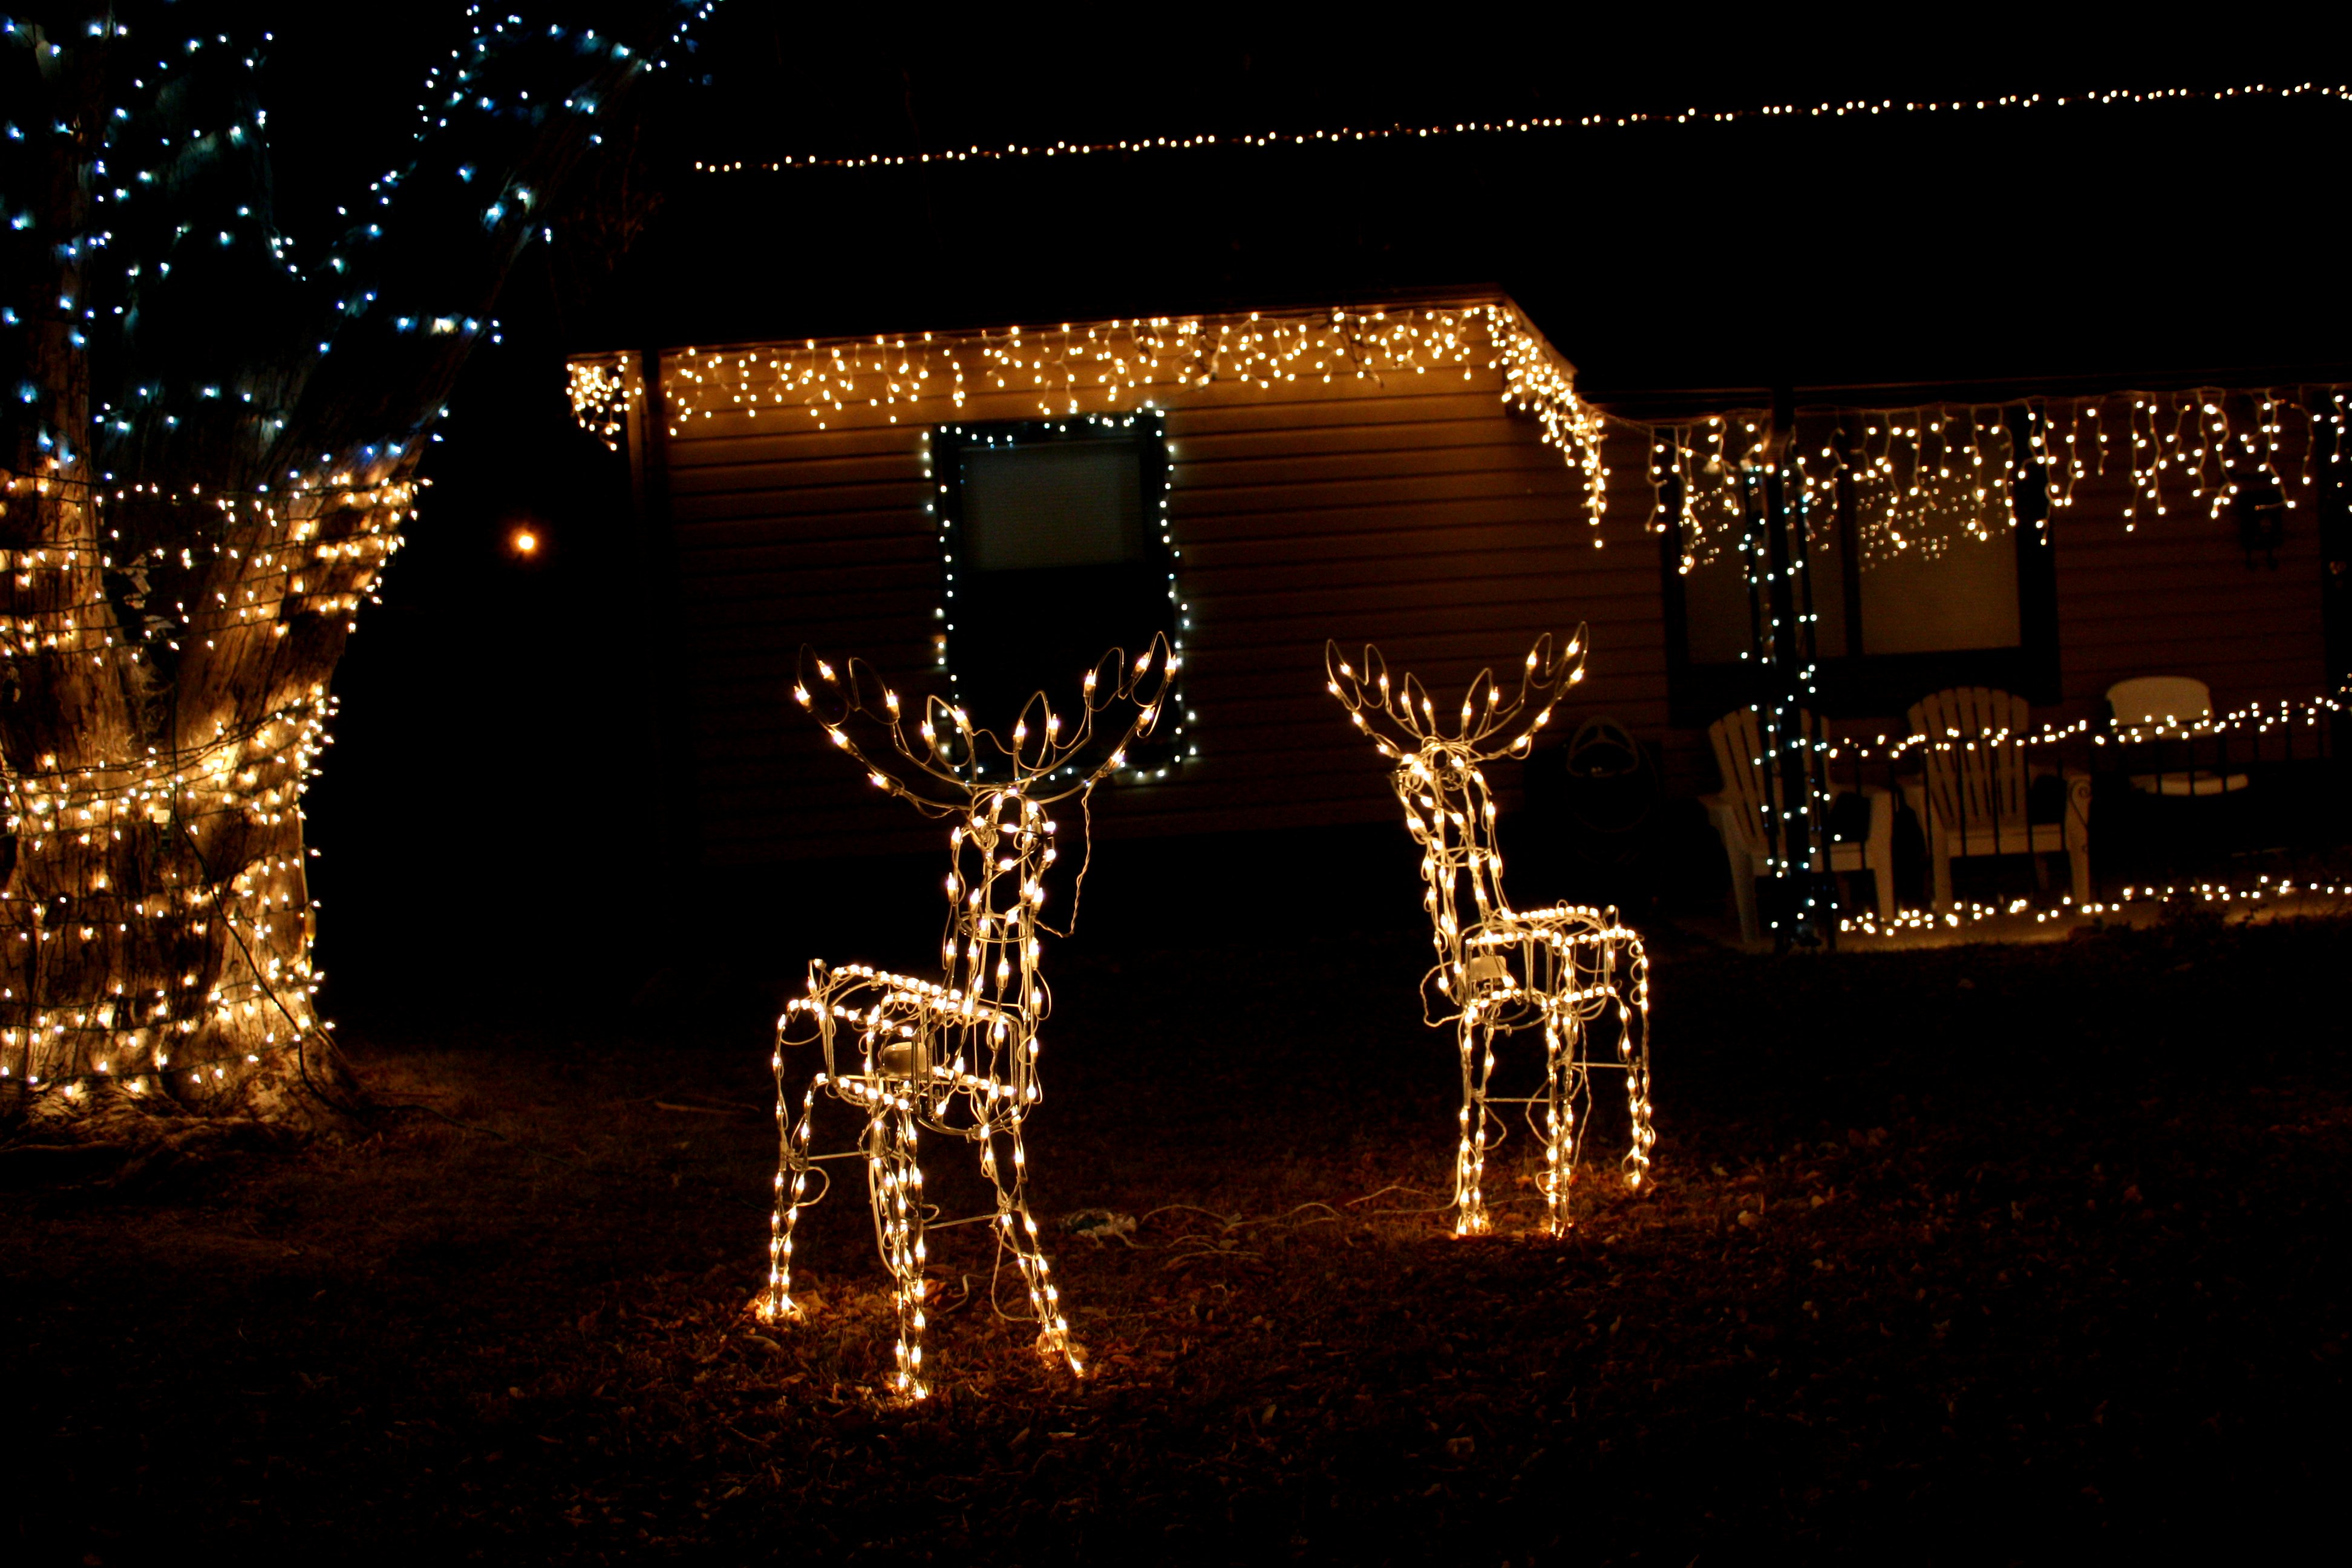 ... lights including holiday icicle lights and two lighted reindeer